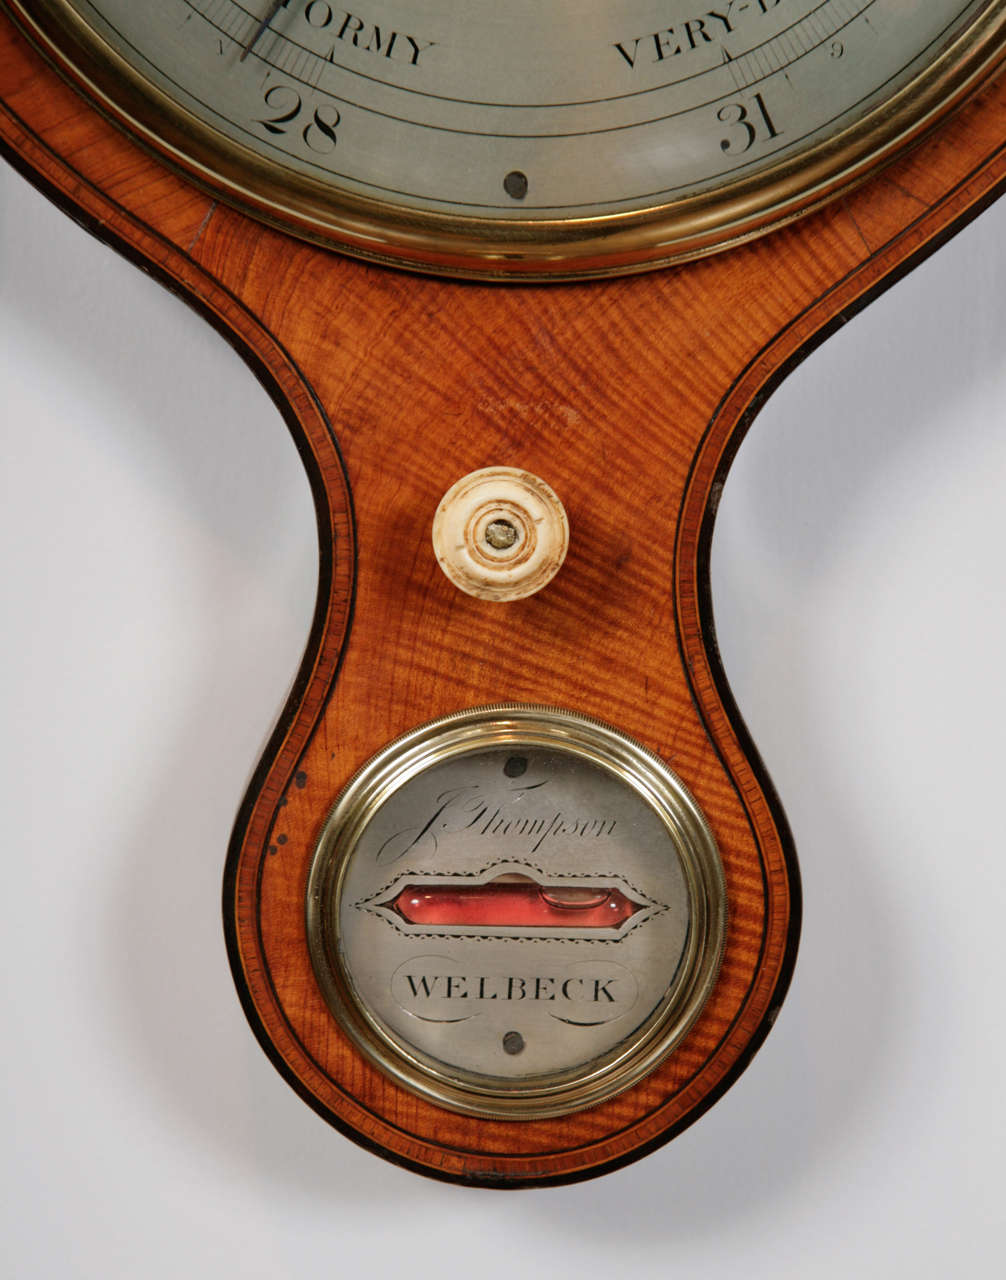 George III Period Antique Barometer by J Thompson, Welbeck 1